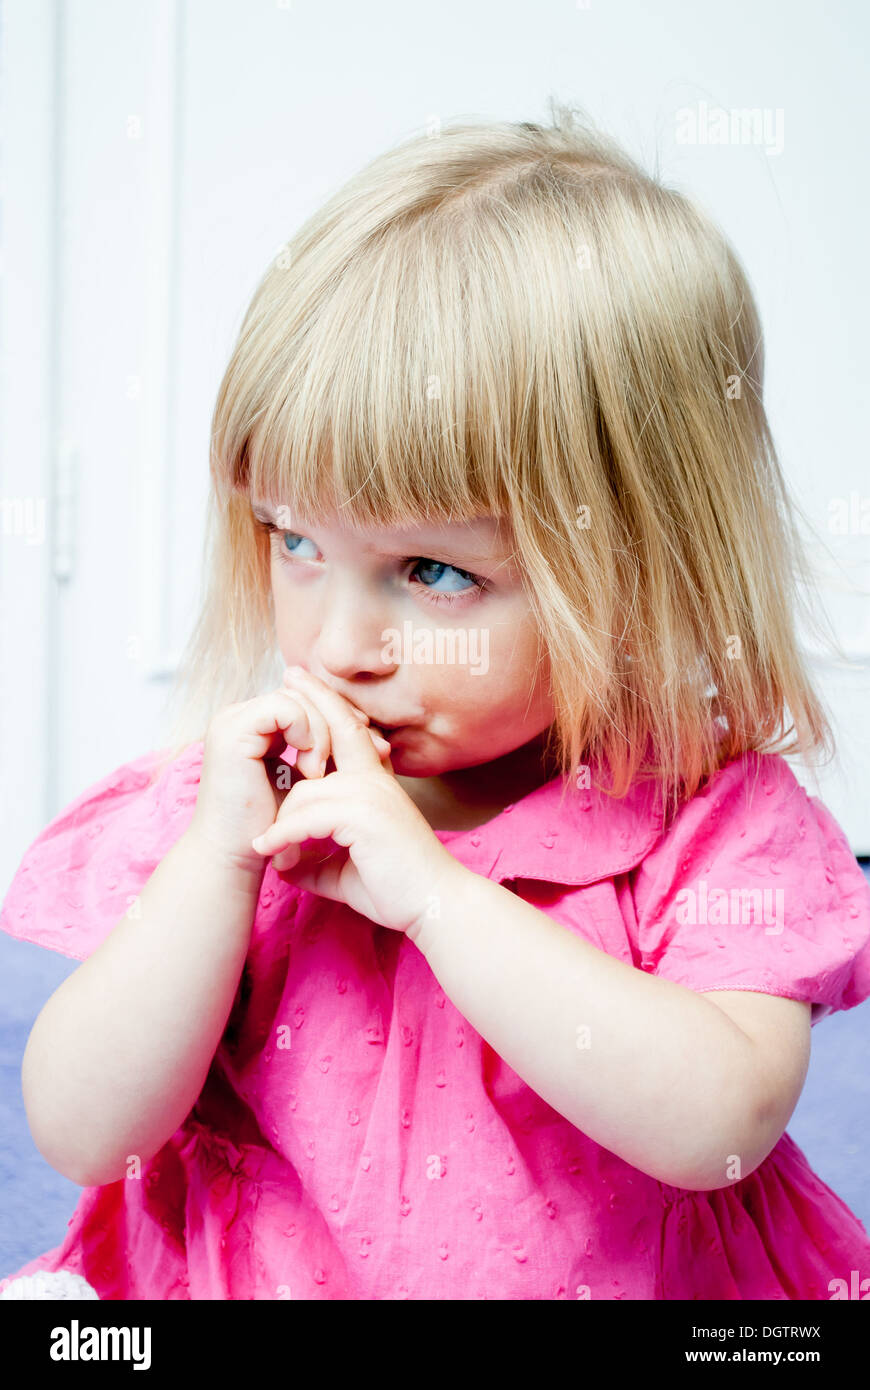 Unhappy little girl with her hands to her face. Stock Photo